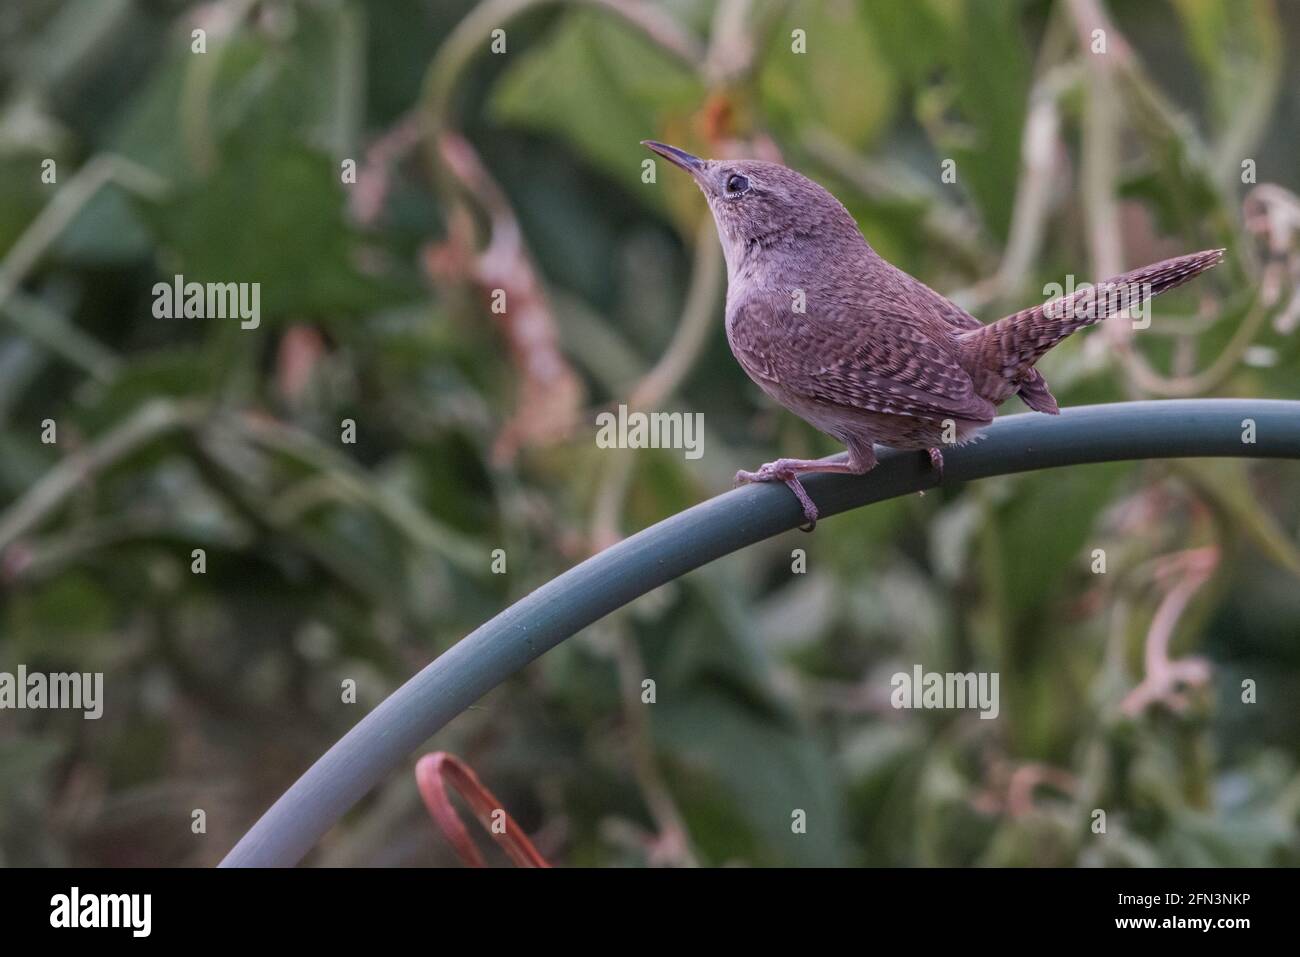 A house wren (Troglodytes aedon) perches in a marsh in San Joaquin wildlife reserve within the central valley of California, USA. Stock Photo